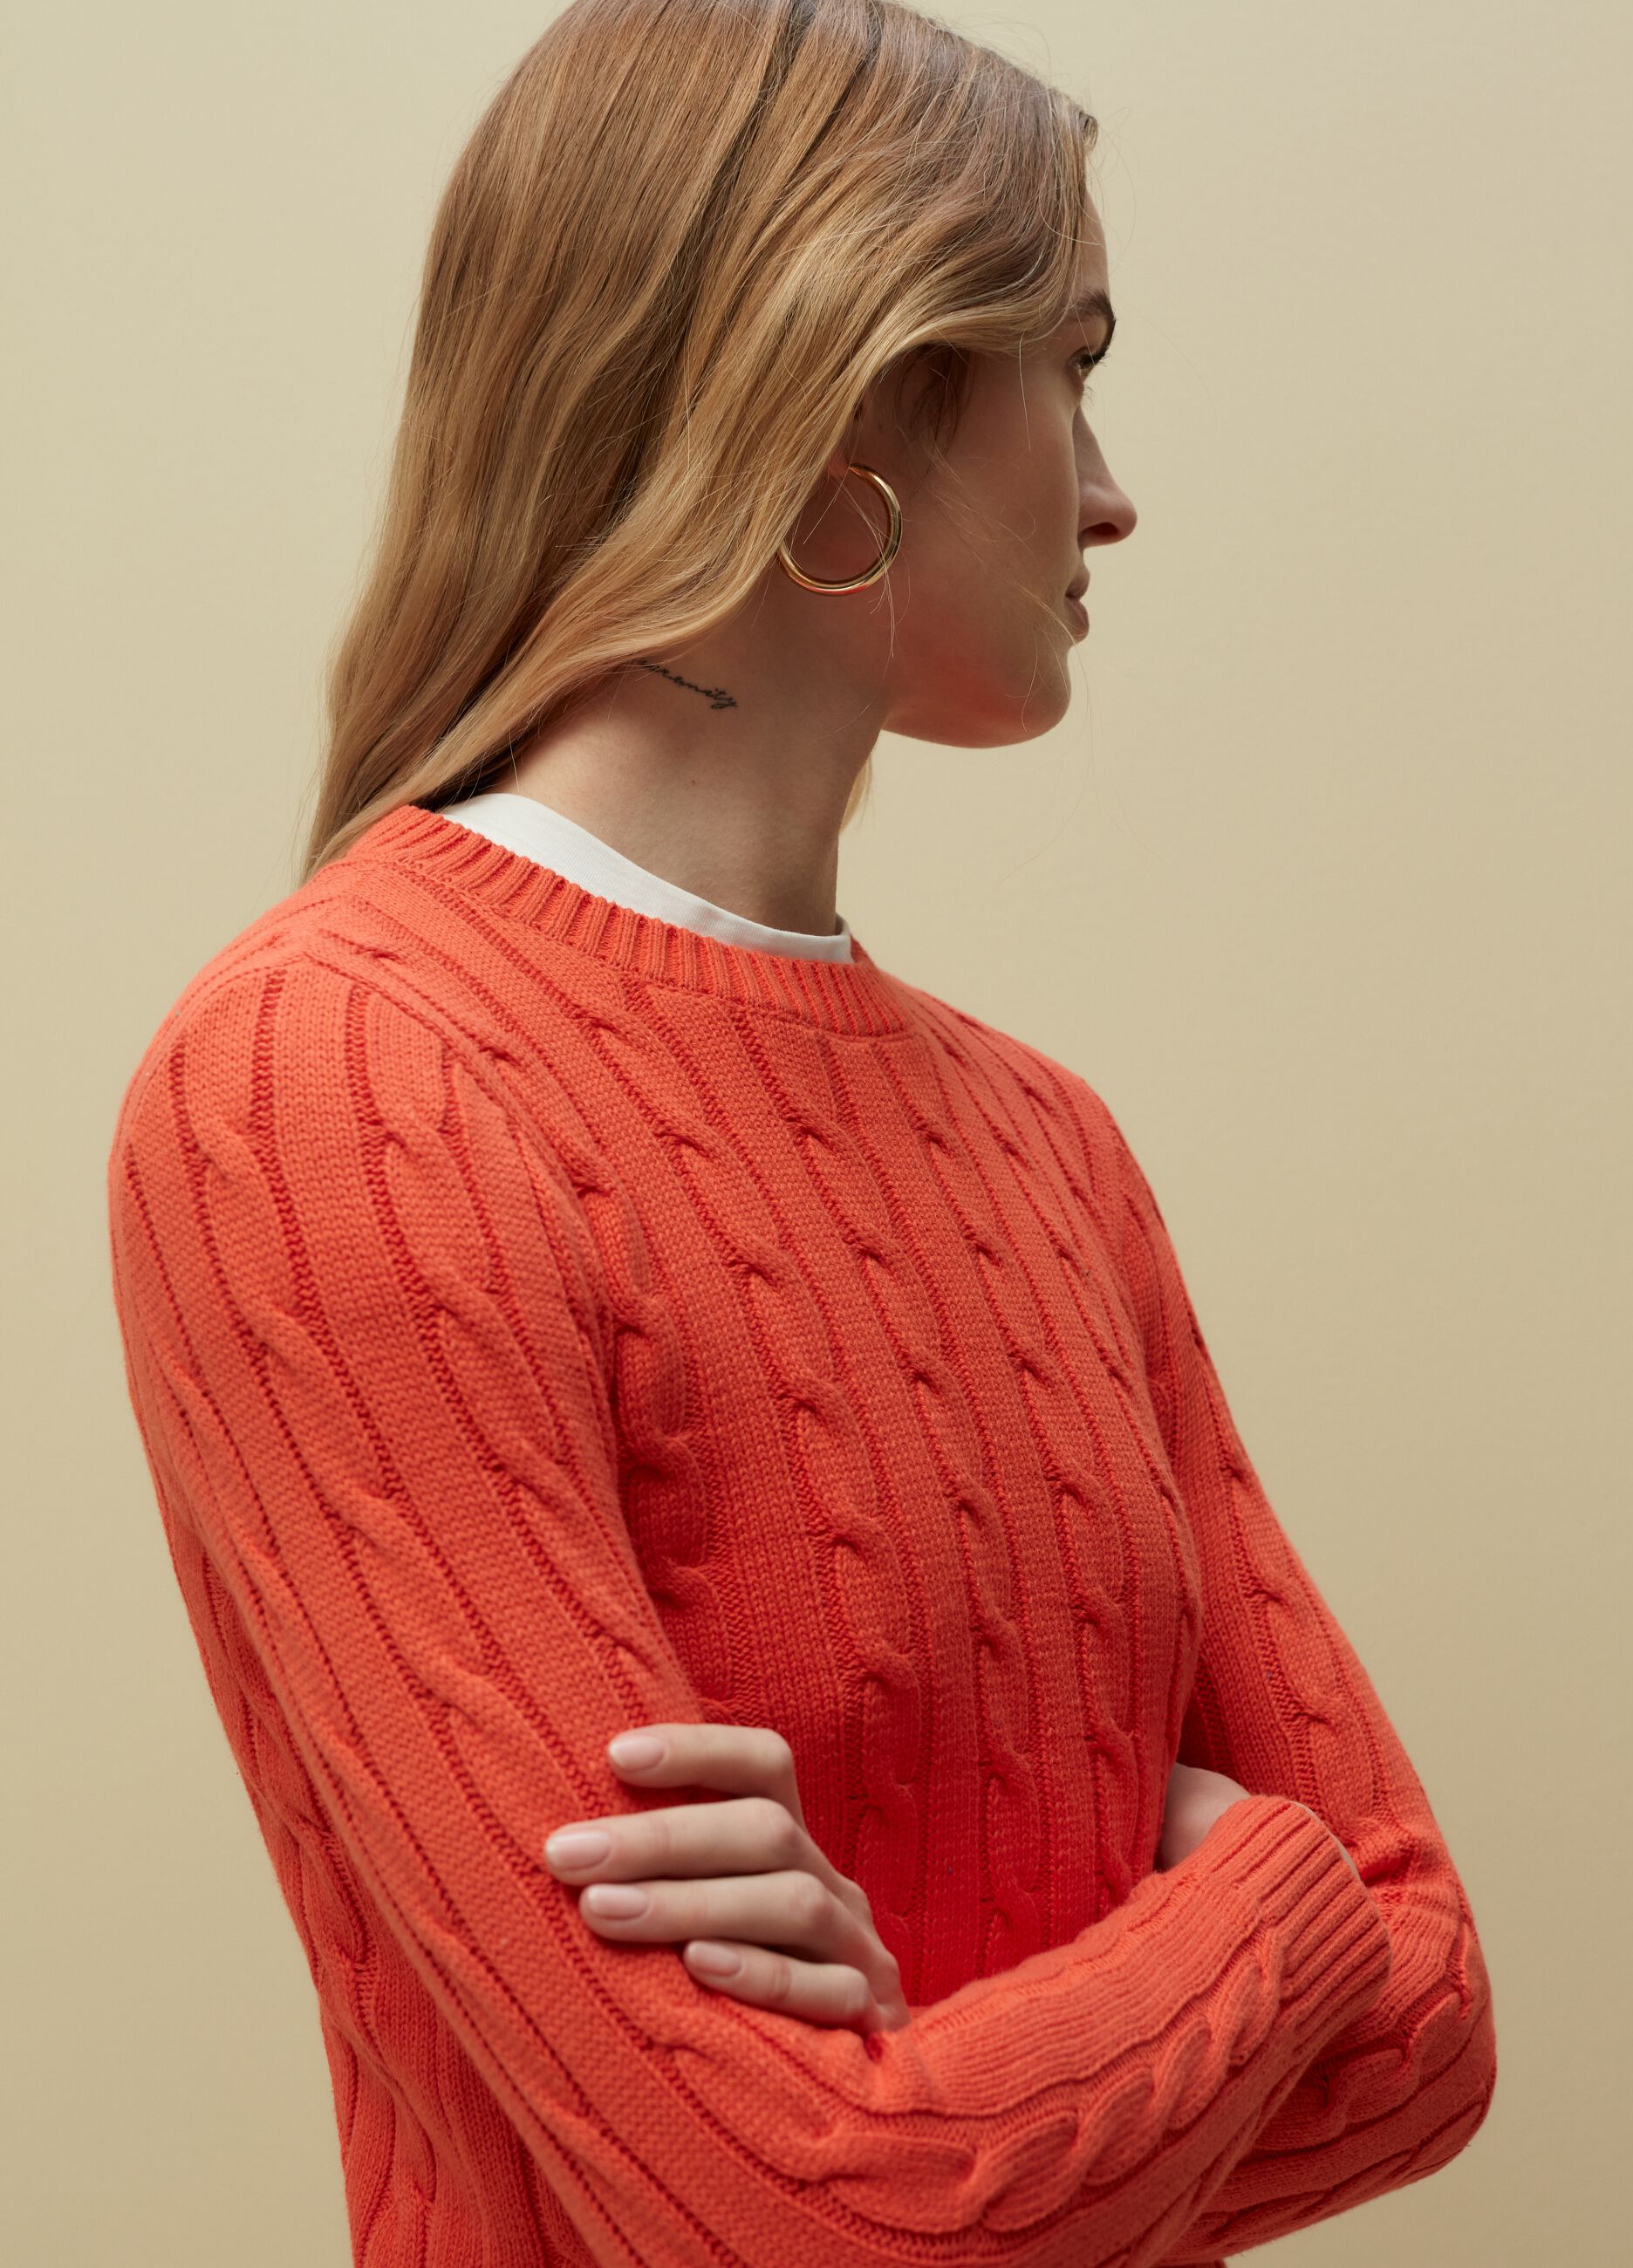 Cotton pullover with cable design